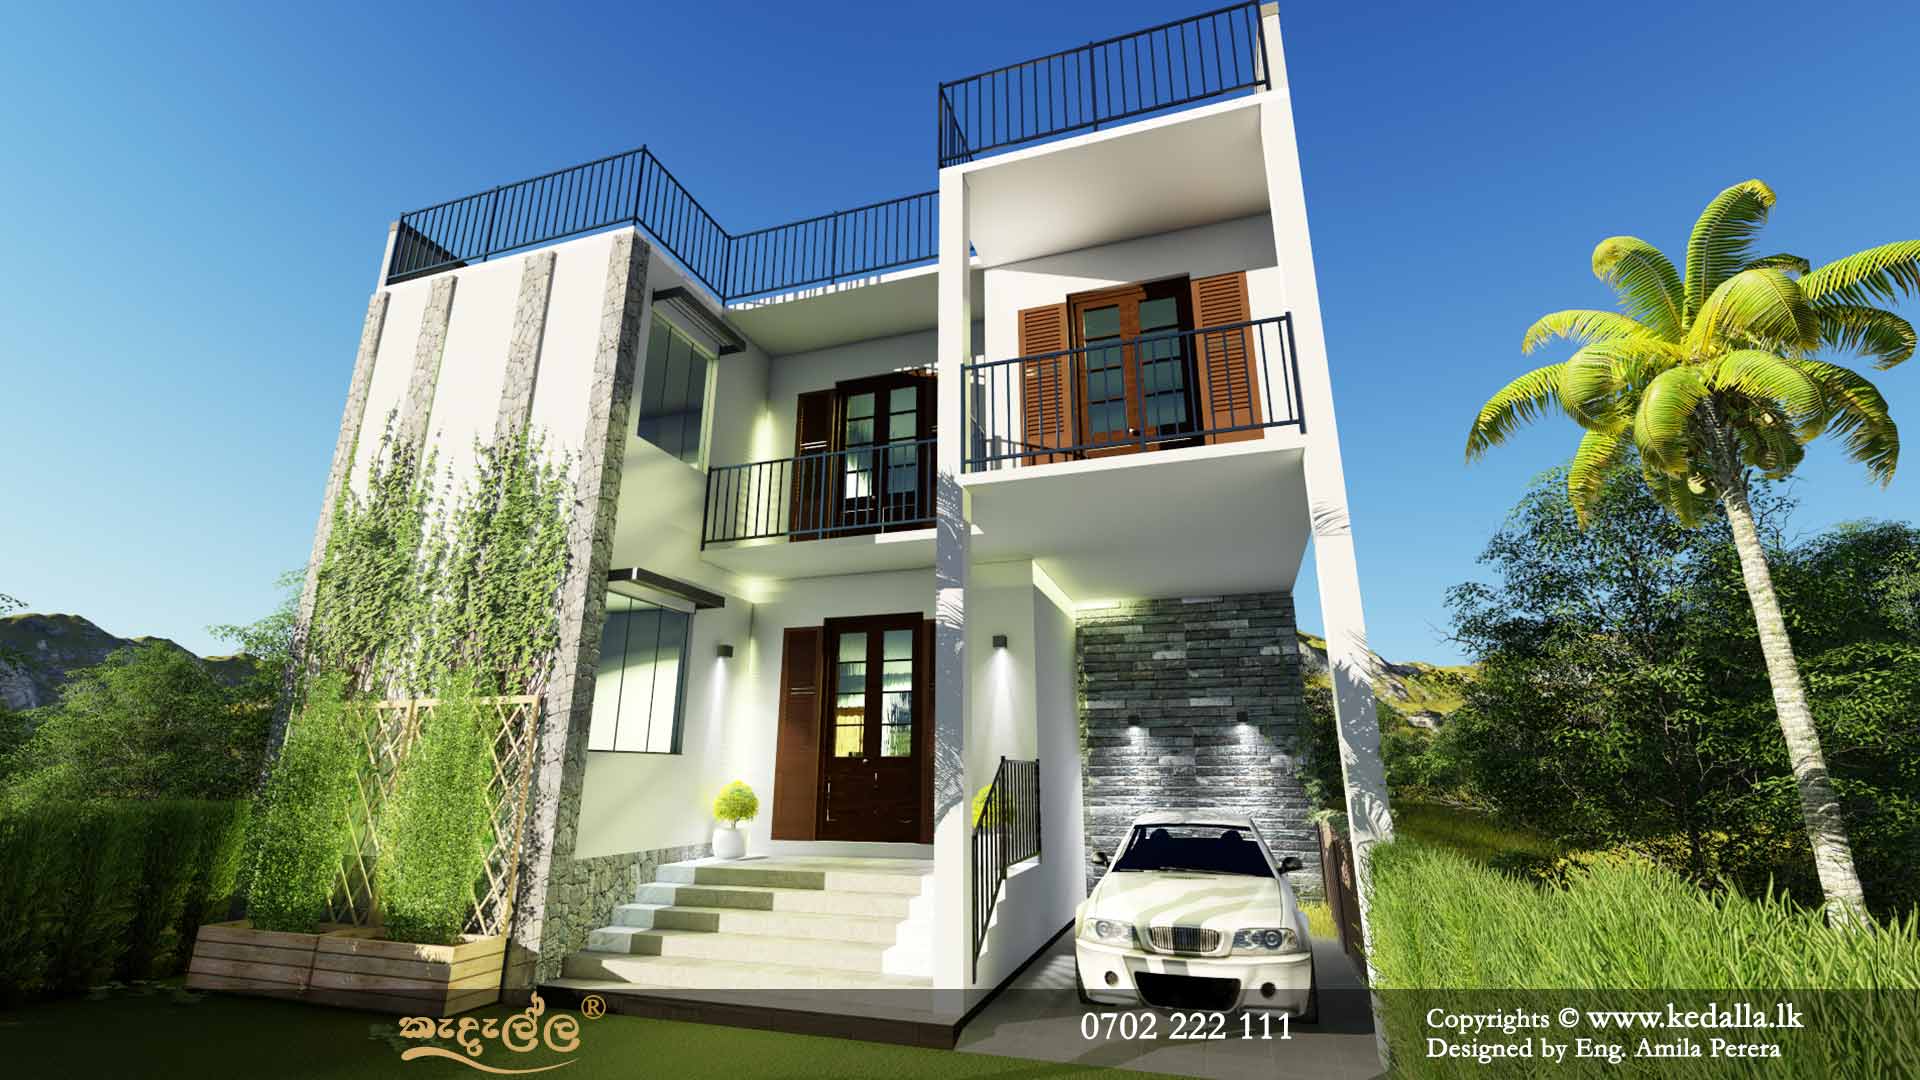 Single family elevated home design has an approximately circle shaped floor plans distinguished by attractiveness